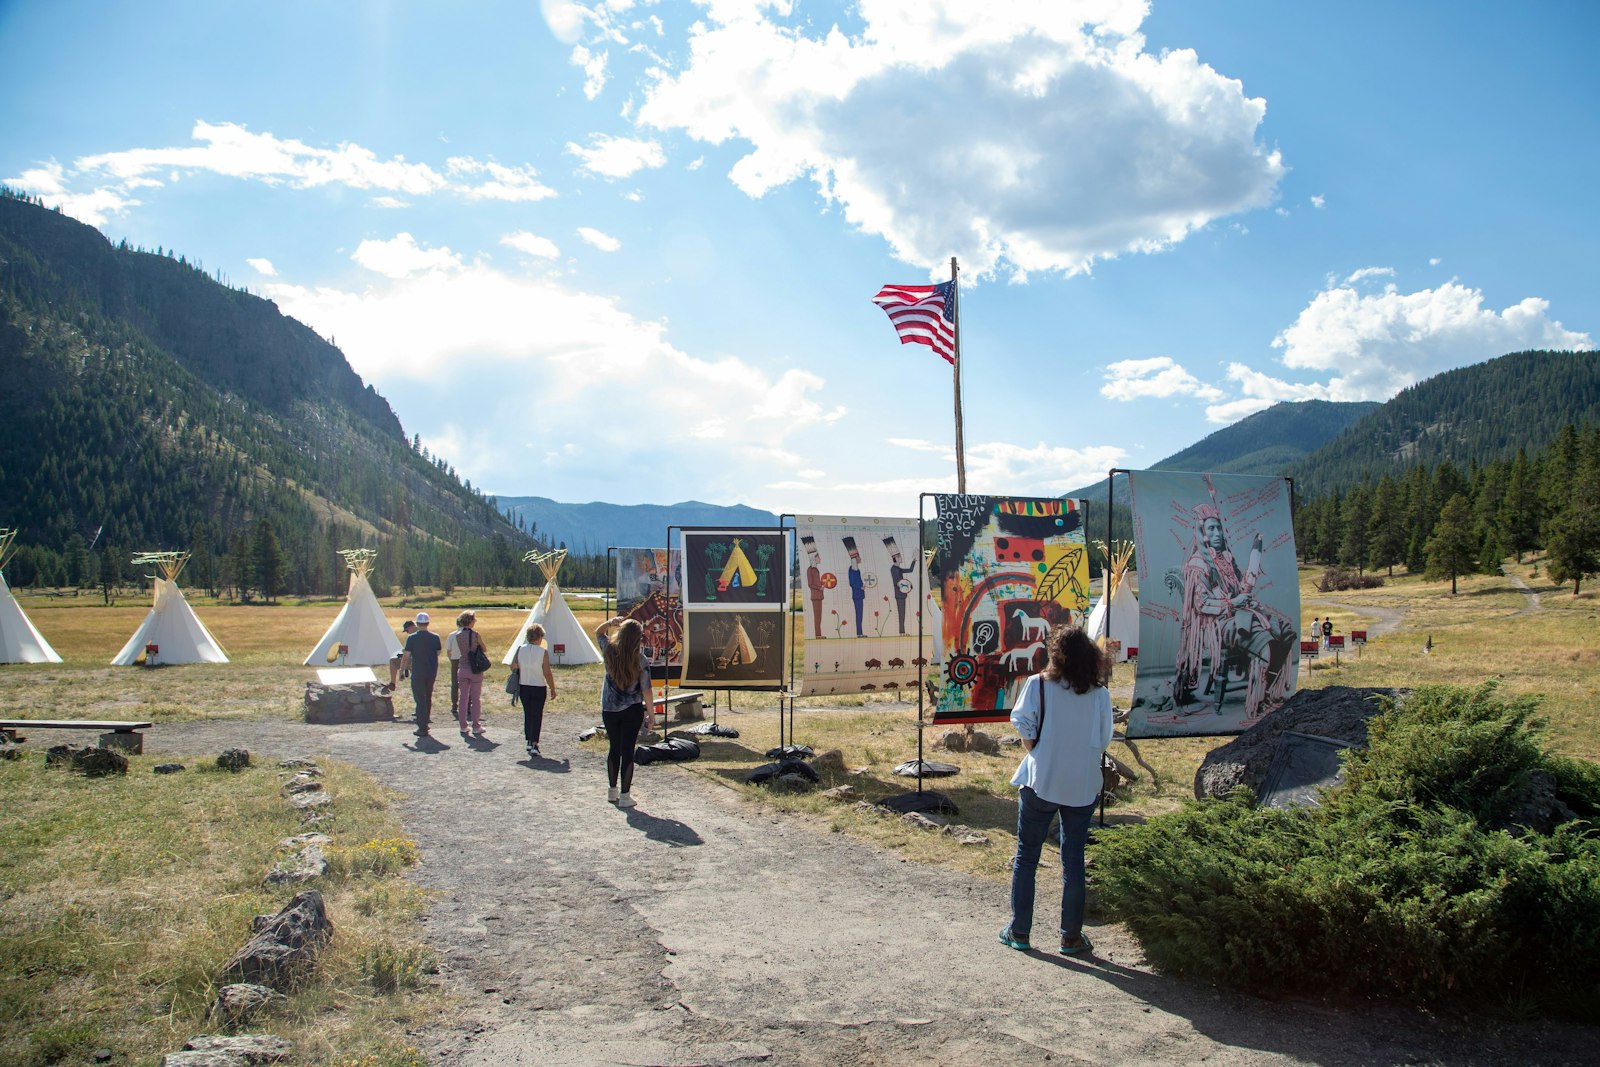 Art installation and teepees at Yellowstone National Park